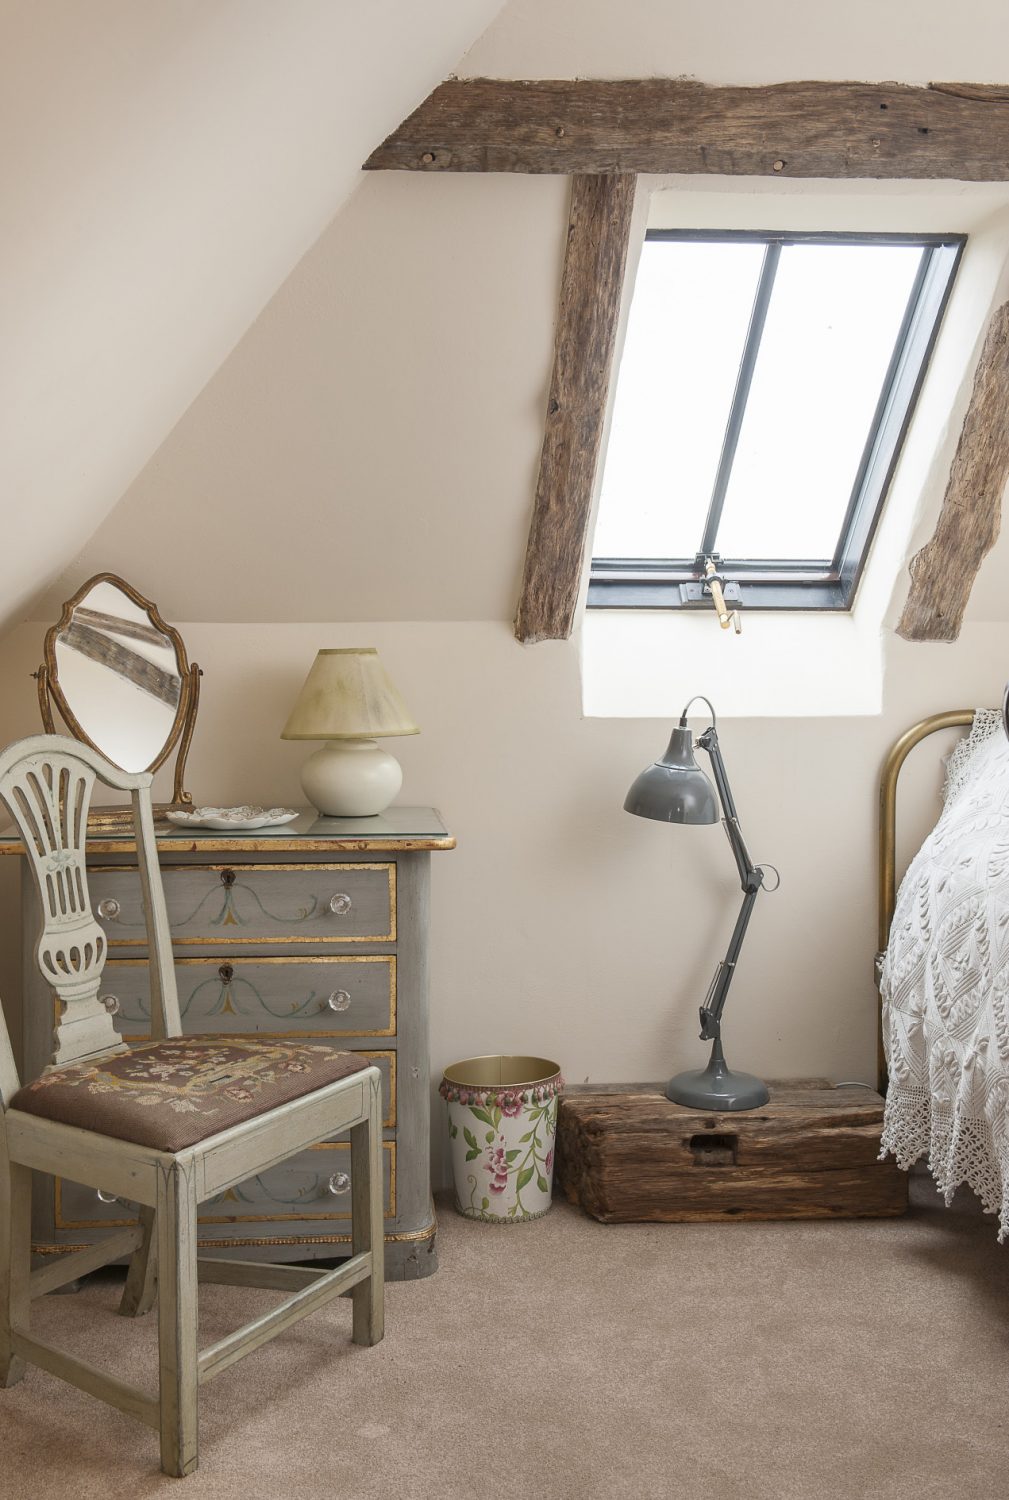 The upstairs bedrooms – a single and a twin – feature superb reclaimed oak timbers that give the impression of being high in the attic of a barn